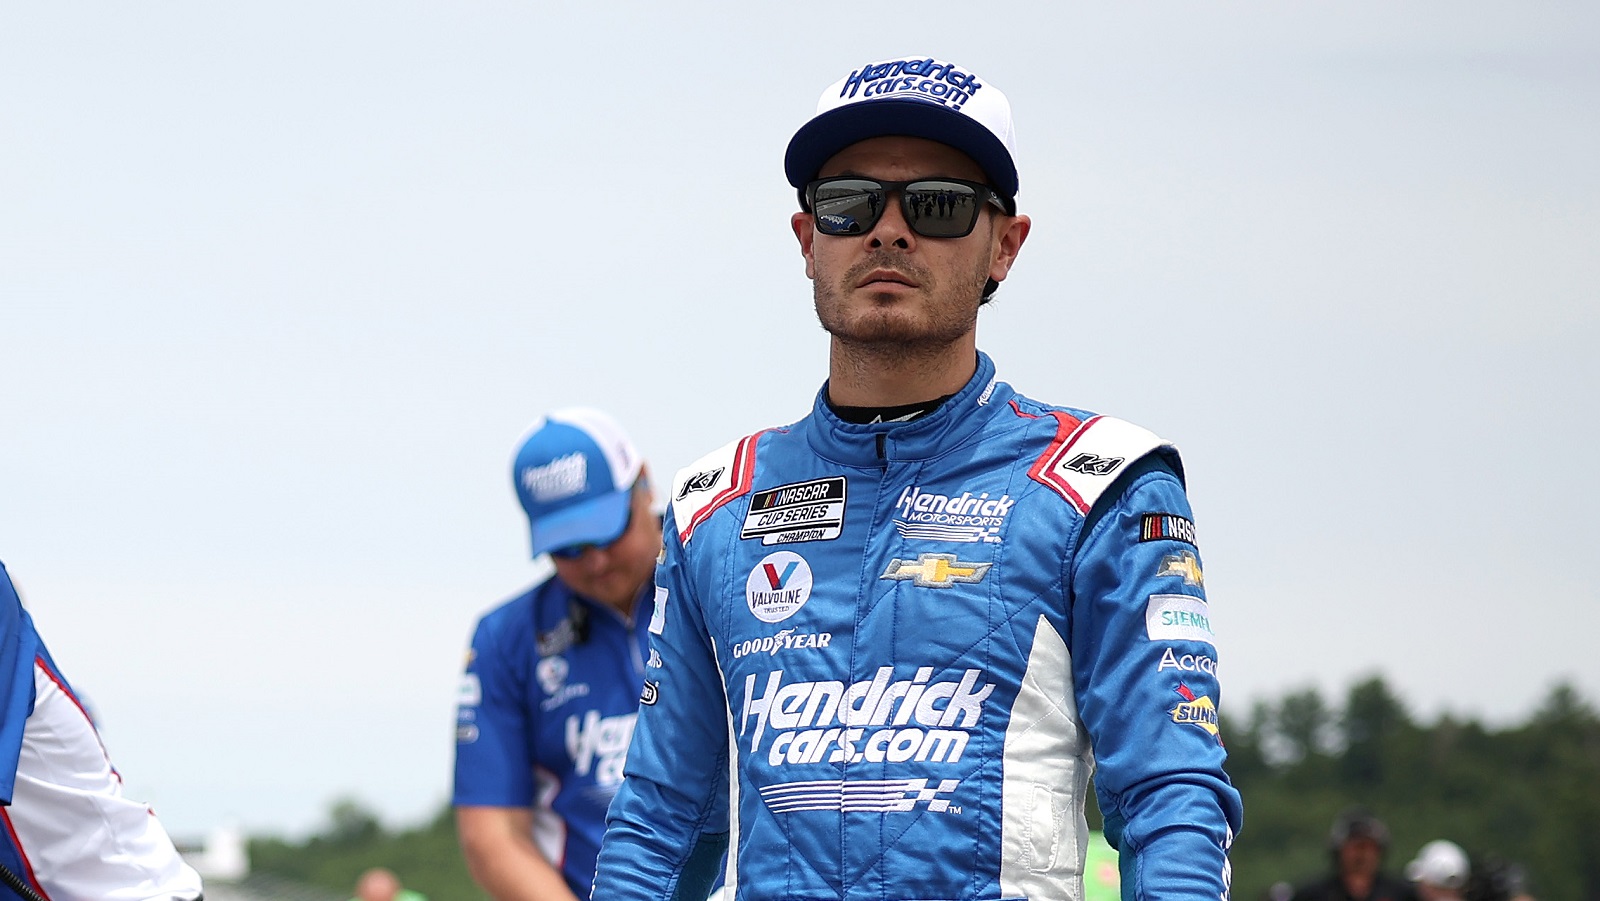 Kyle Larson walks the grid during qualifying for the NASCAR Cup Series Ambetter 301 at New Hampshire Motor Speedway on July 16, 2022. | James Gilbert/Getty Images